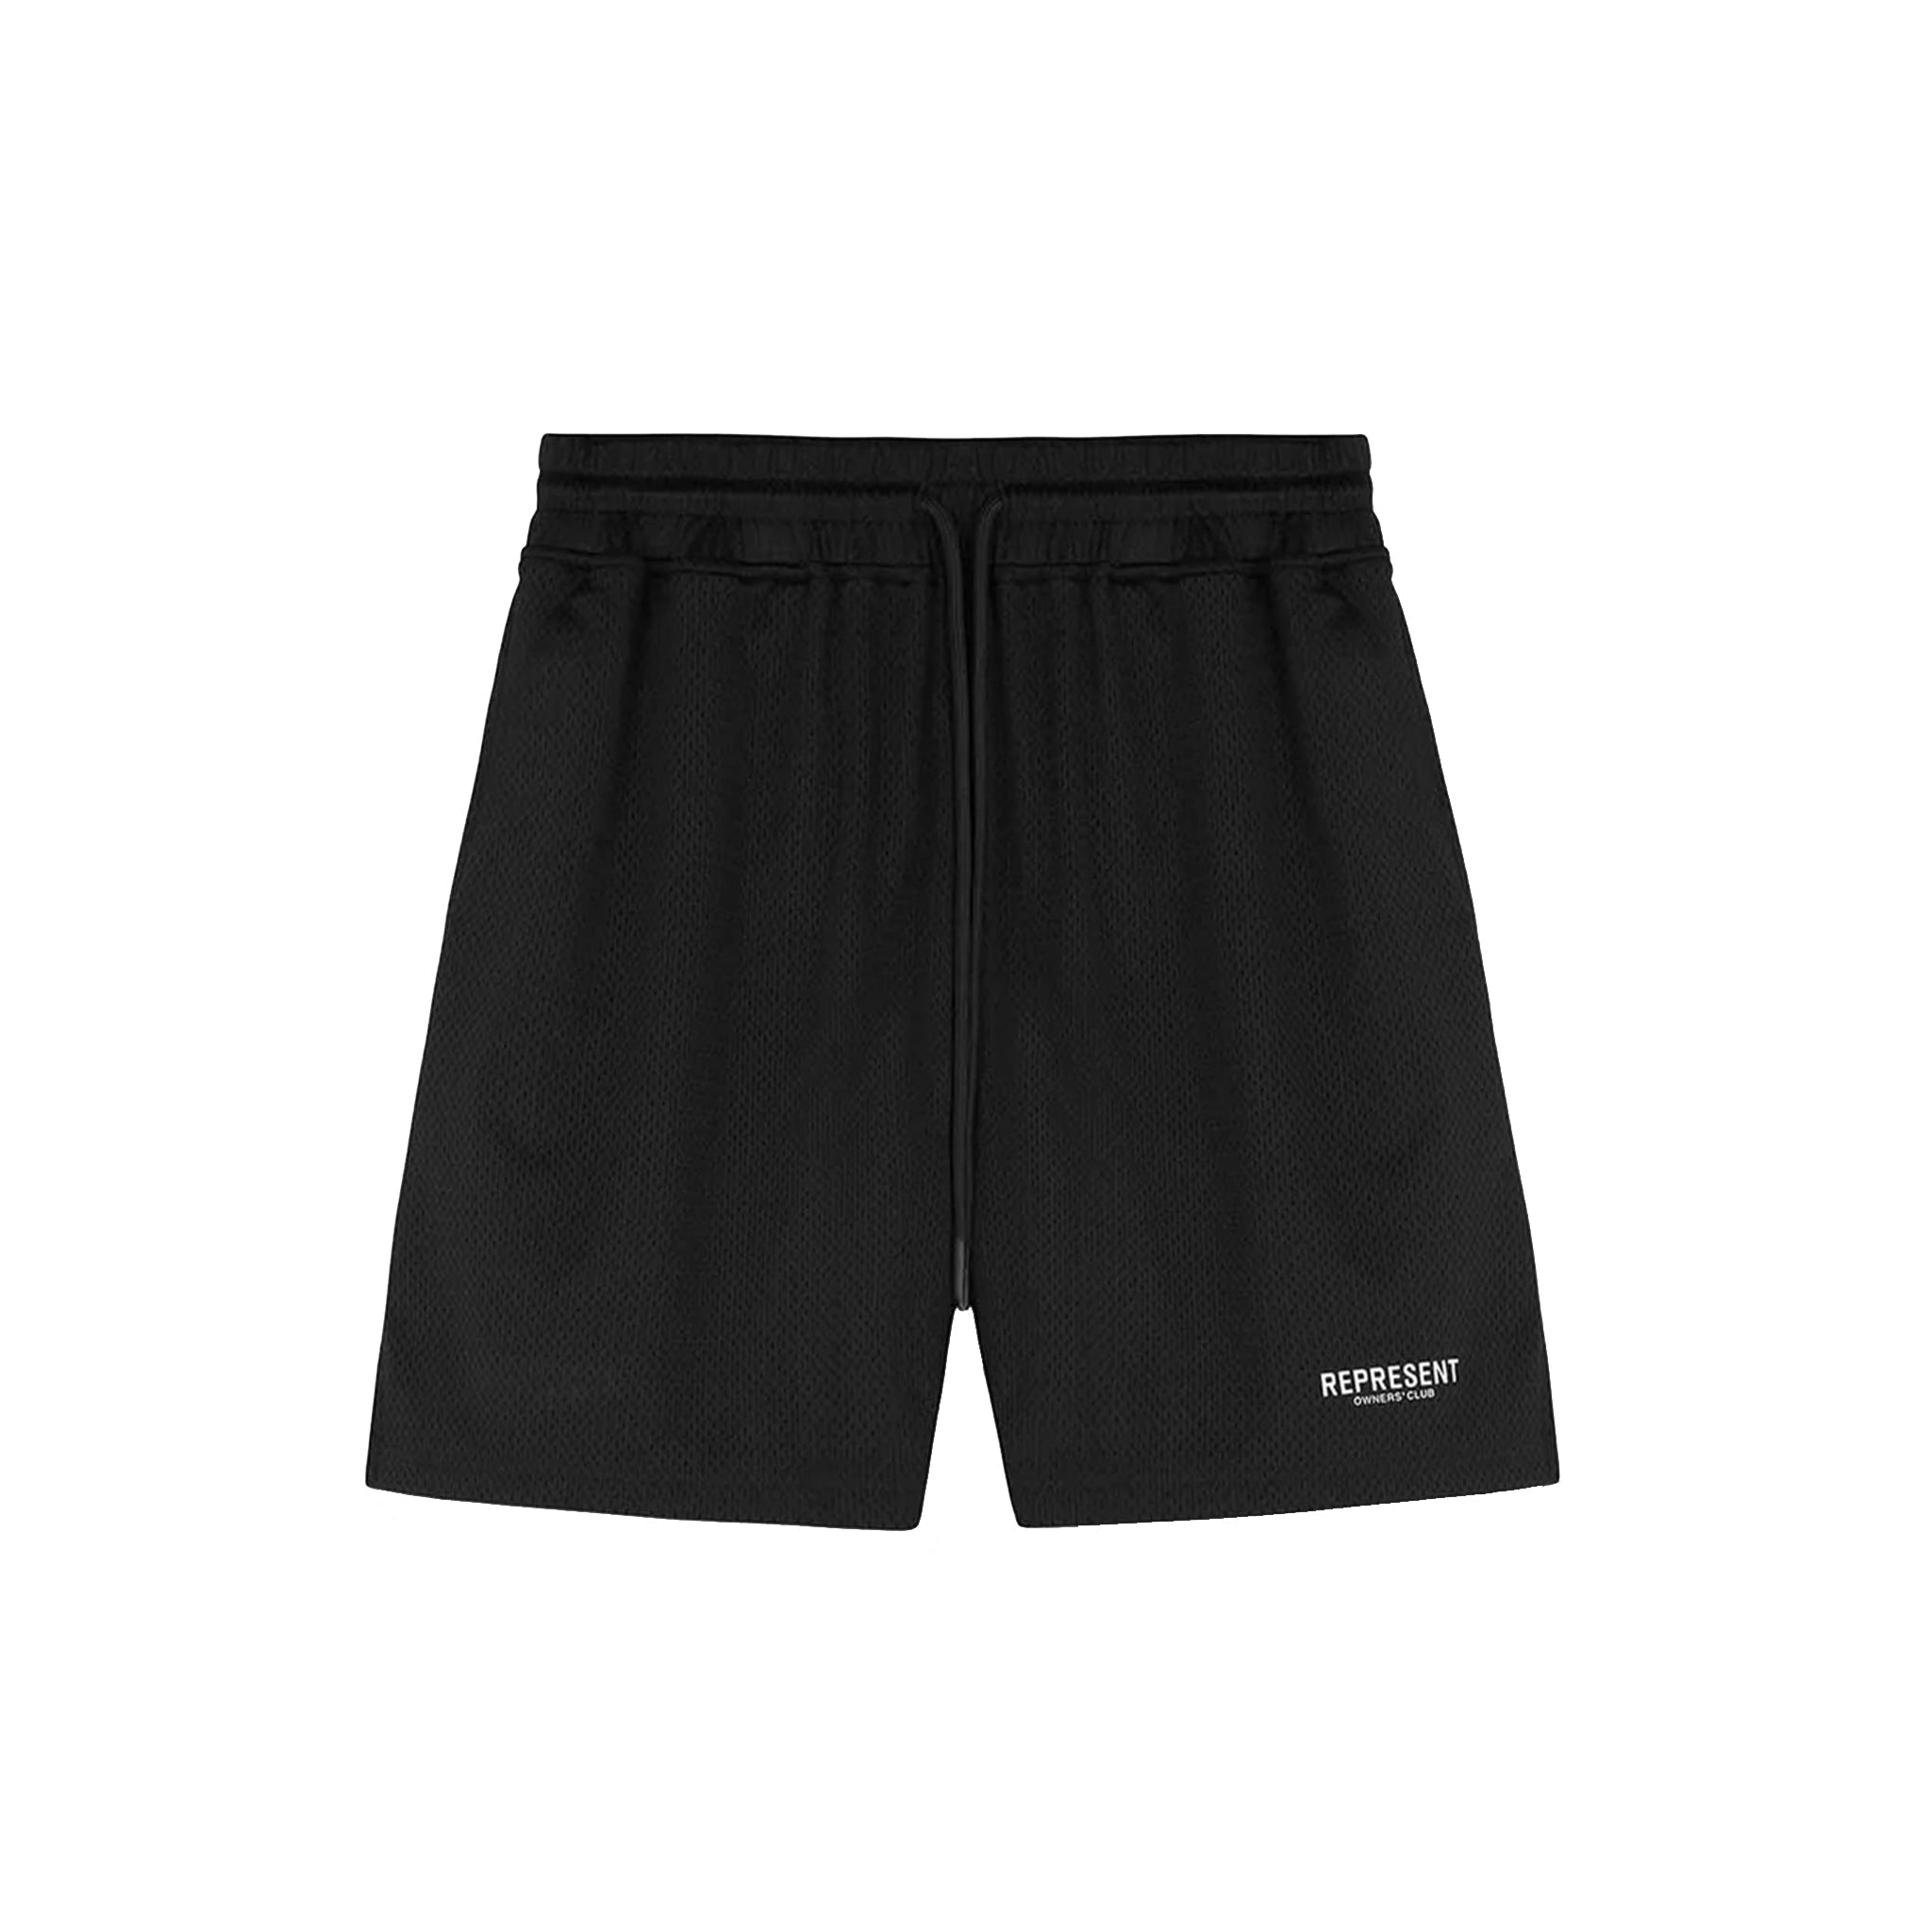 Represent Owners Club Mesh Shorts Black – Story Cape Town